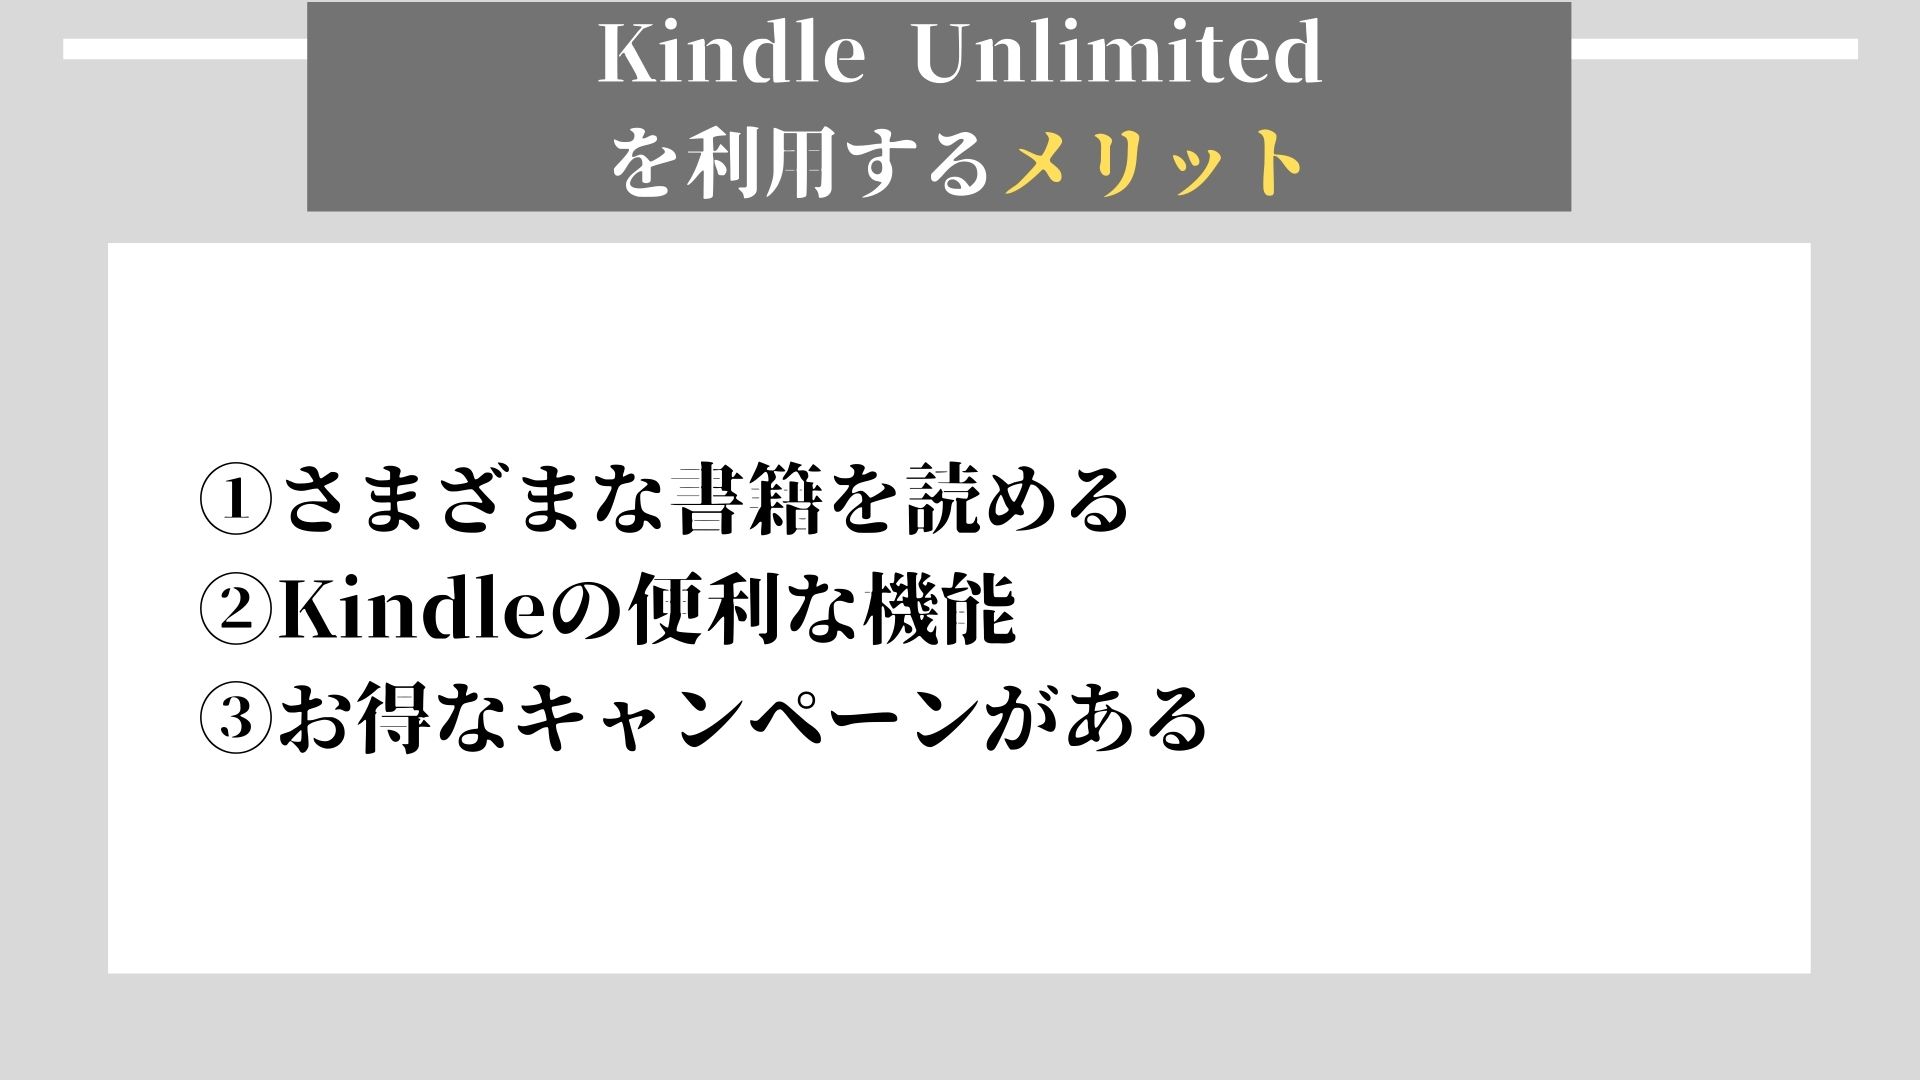 Kindle Unlimited メリット